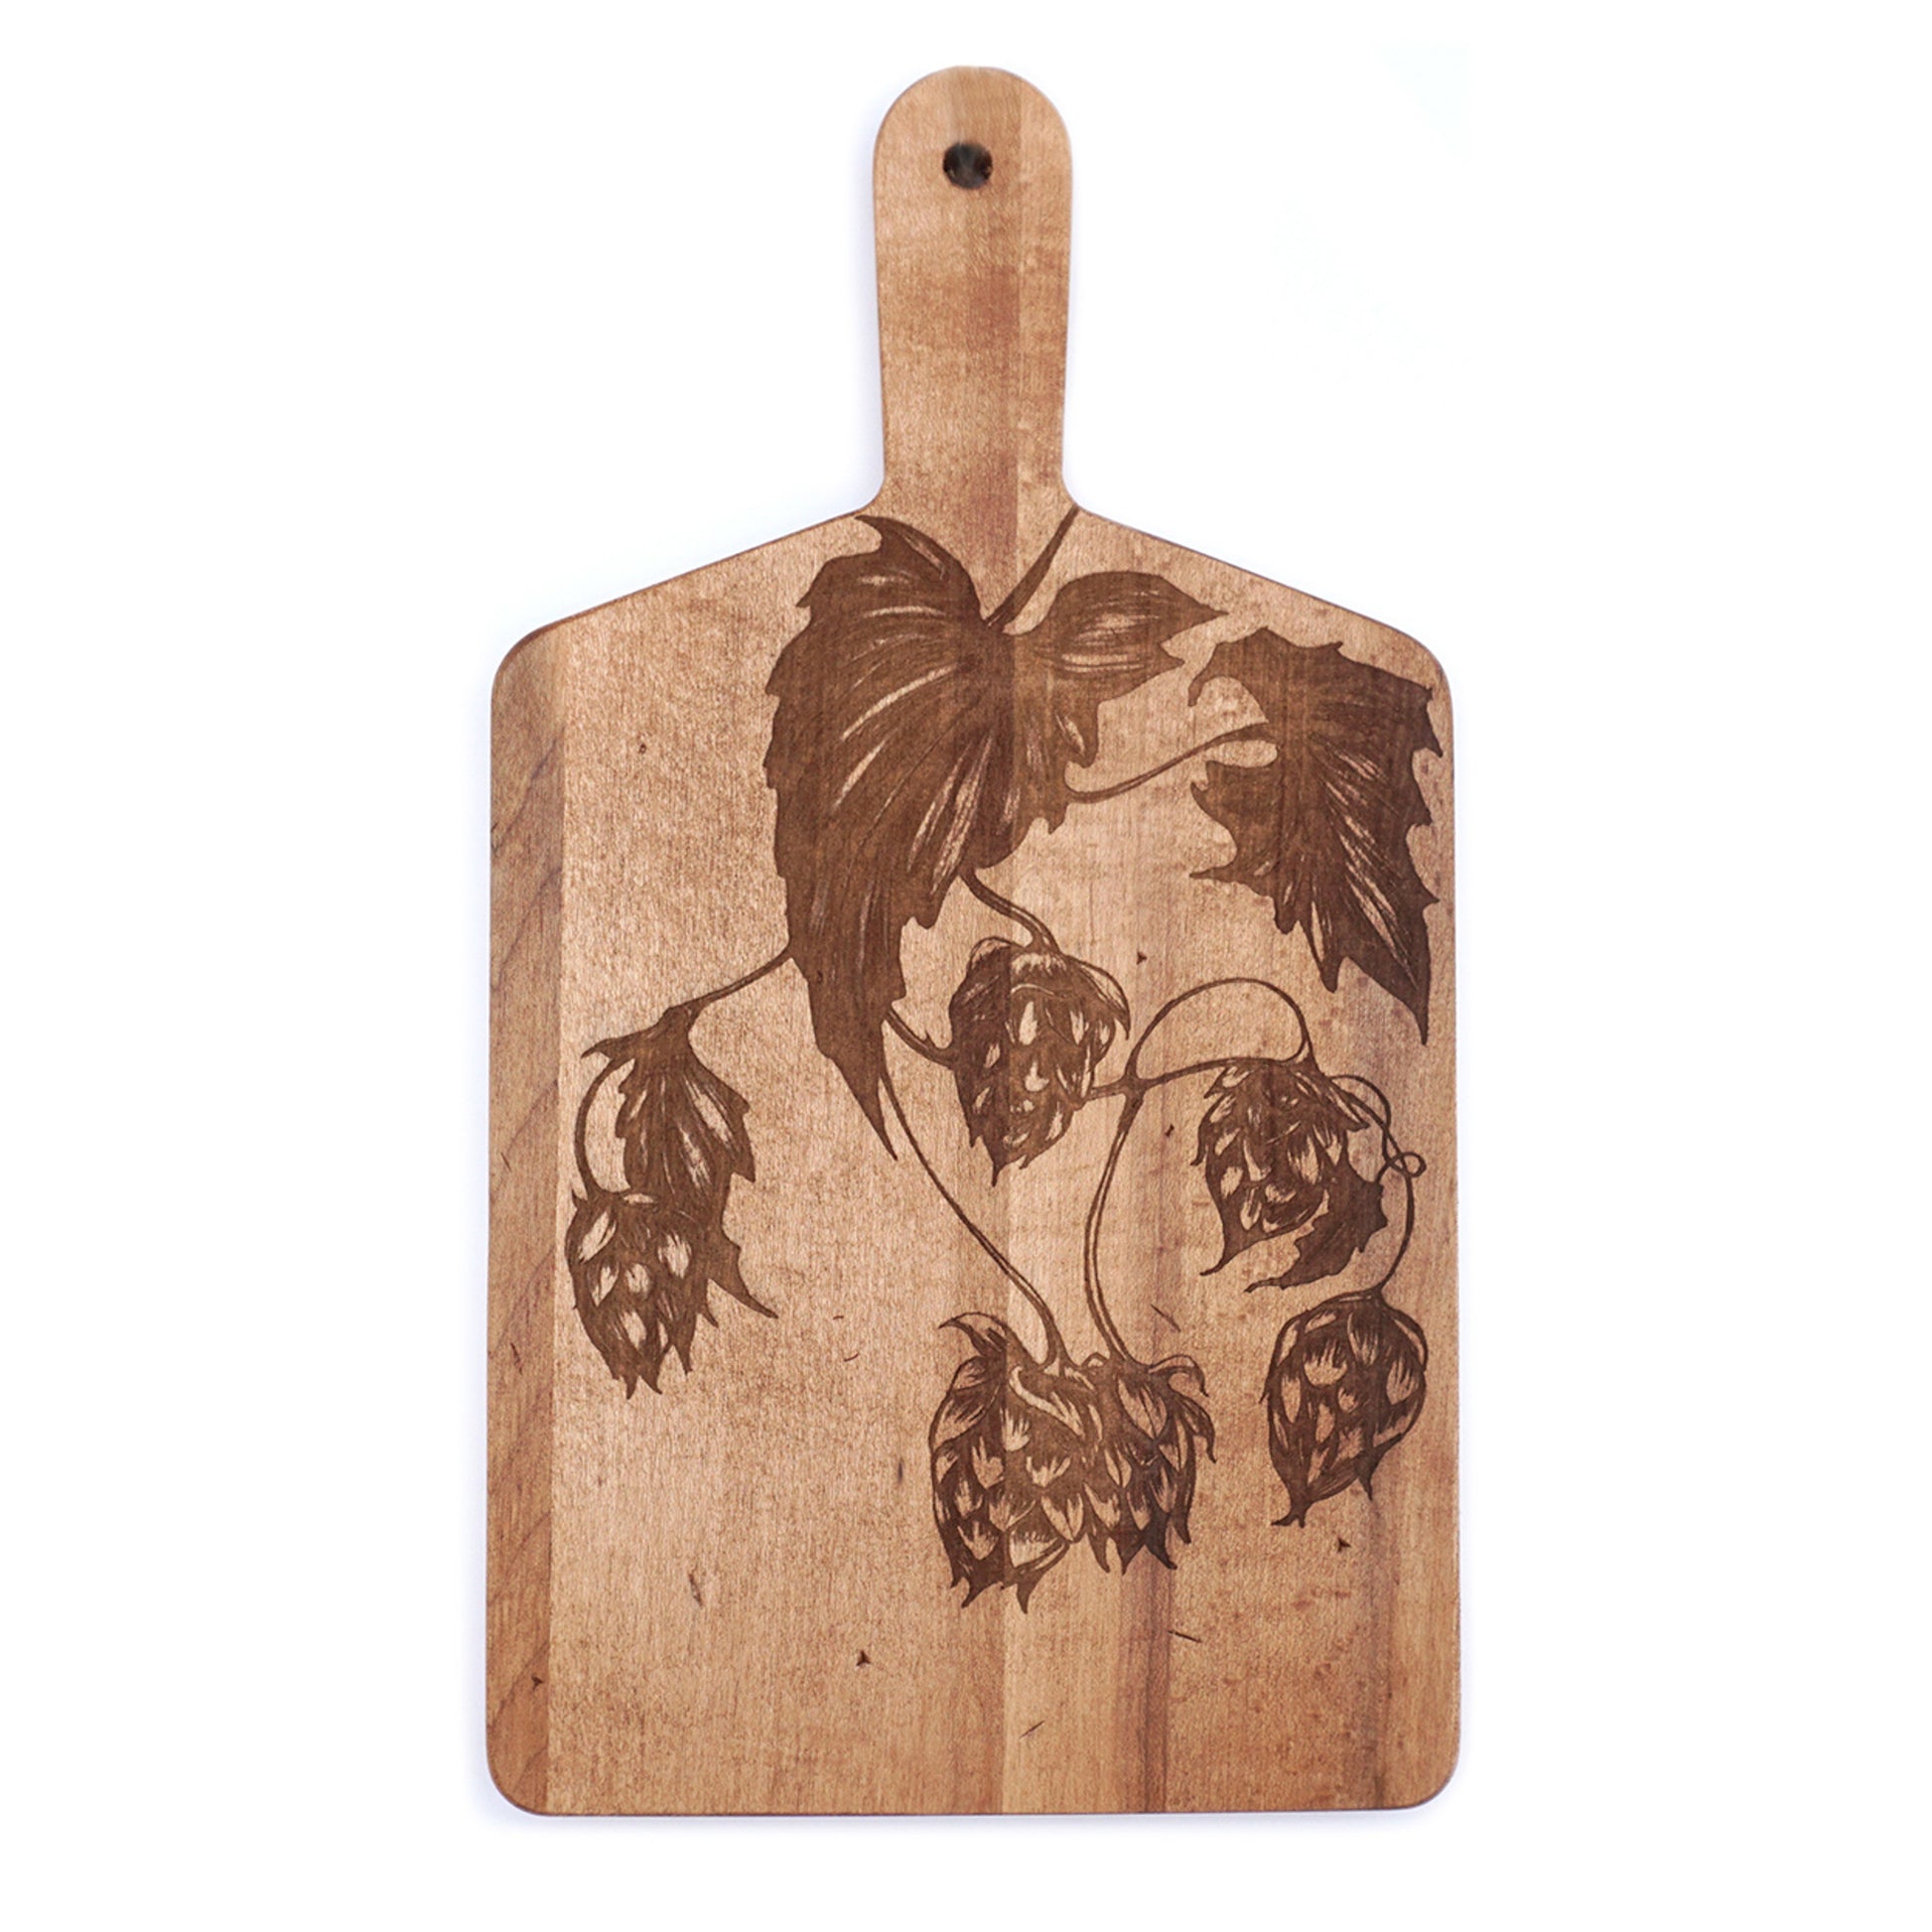 Laura Zindel Artisan Maple Rectangle Handled Serving Board - More designs available